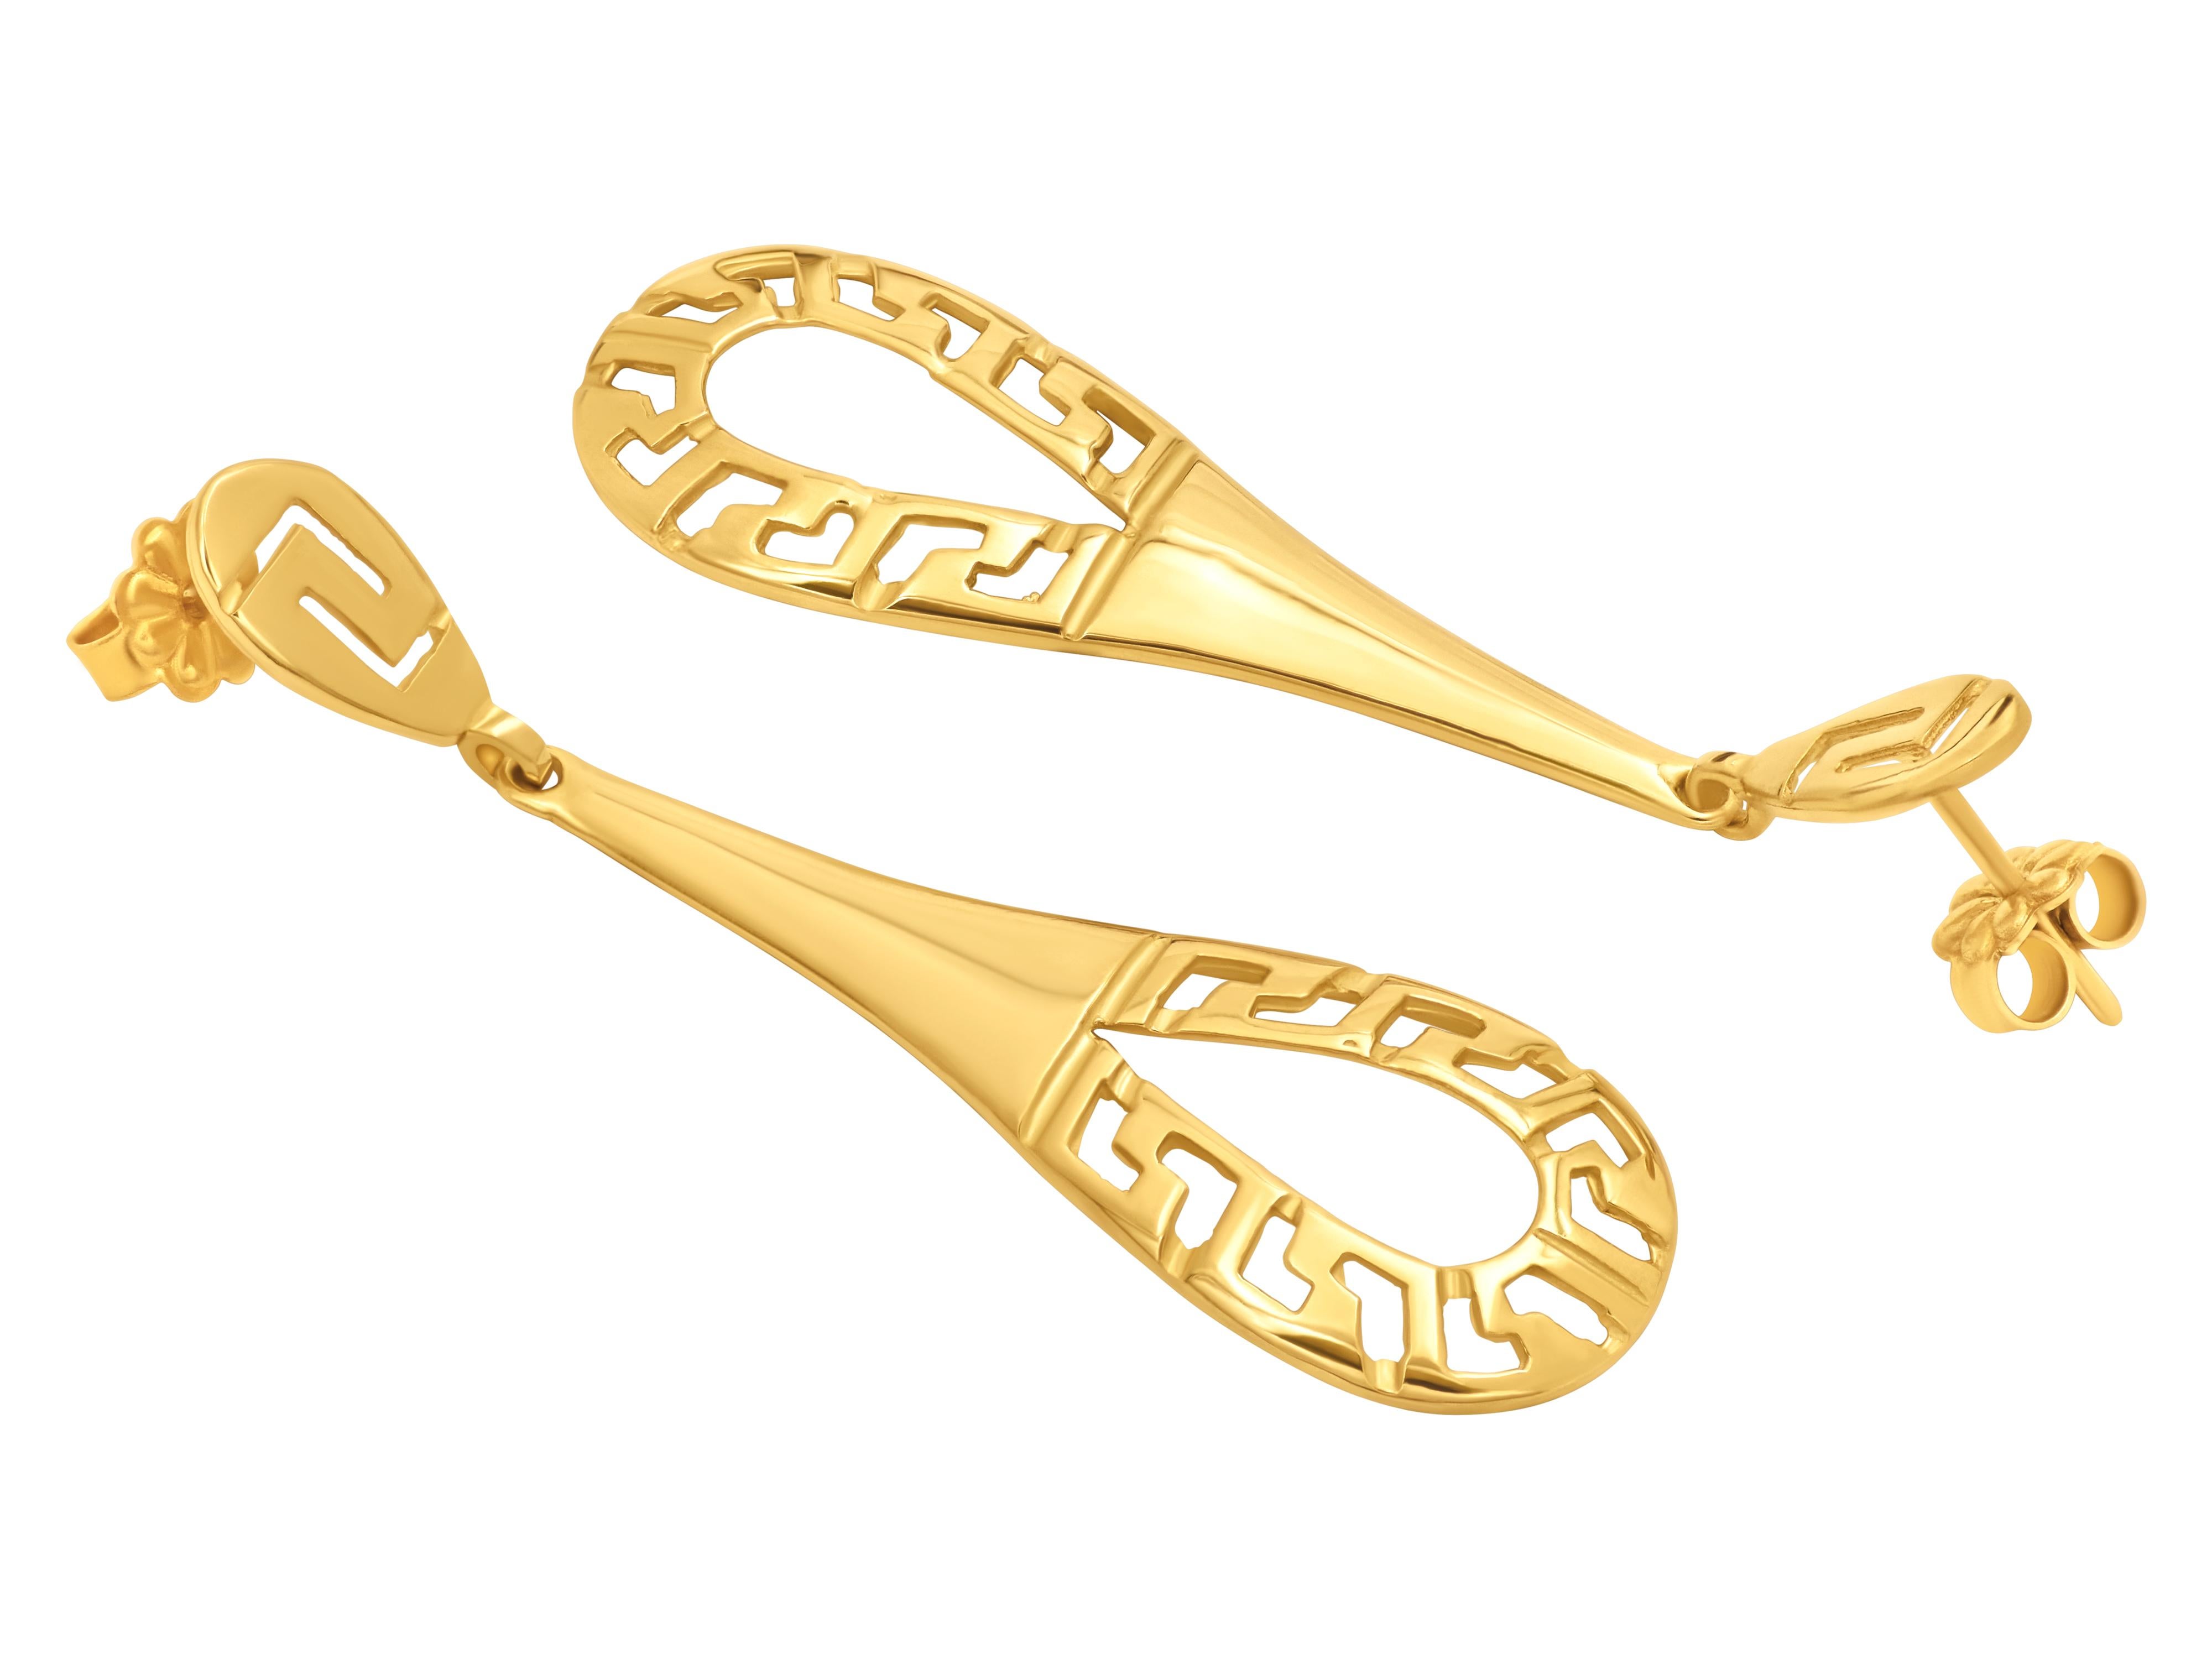 Greek key earrings in 18k yellow gold in drop shape. Unique and not commercial piece with depth and character. A not small size but very light in the eyes due to its openness. Can be made to order in white gold or set with a diamond pave finish. You